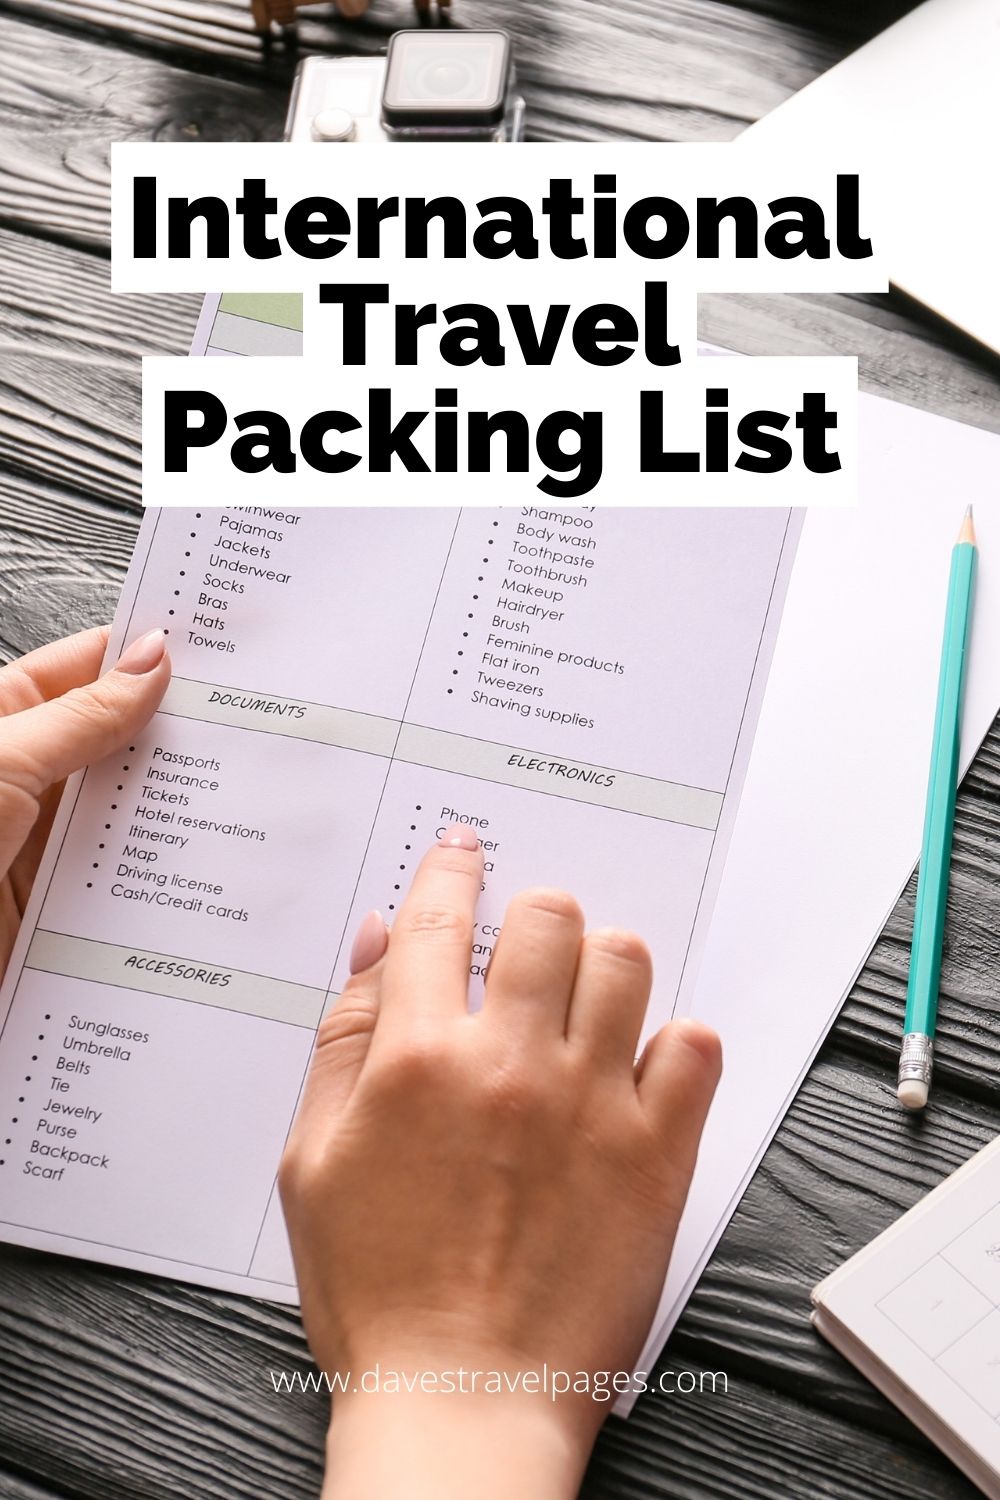 A Complete International Traveling Checklist